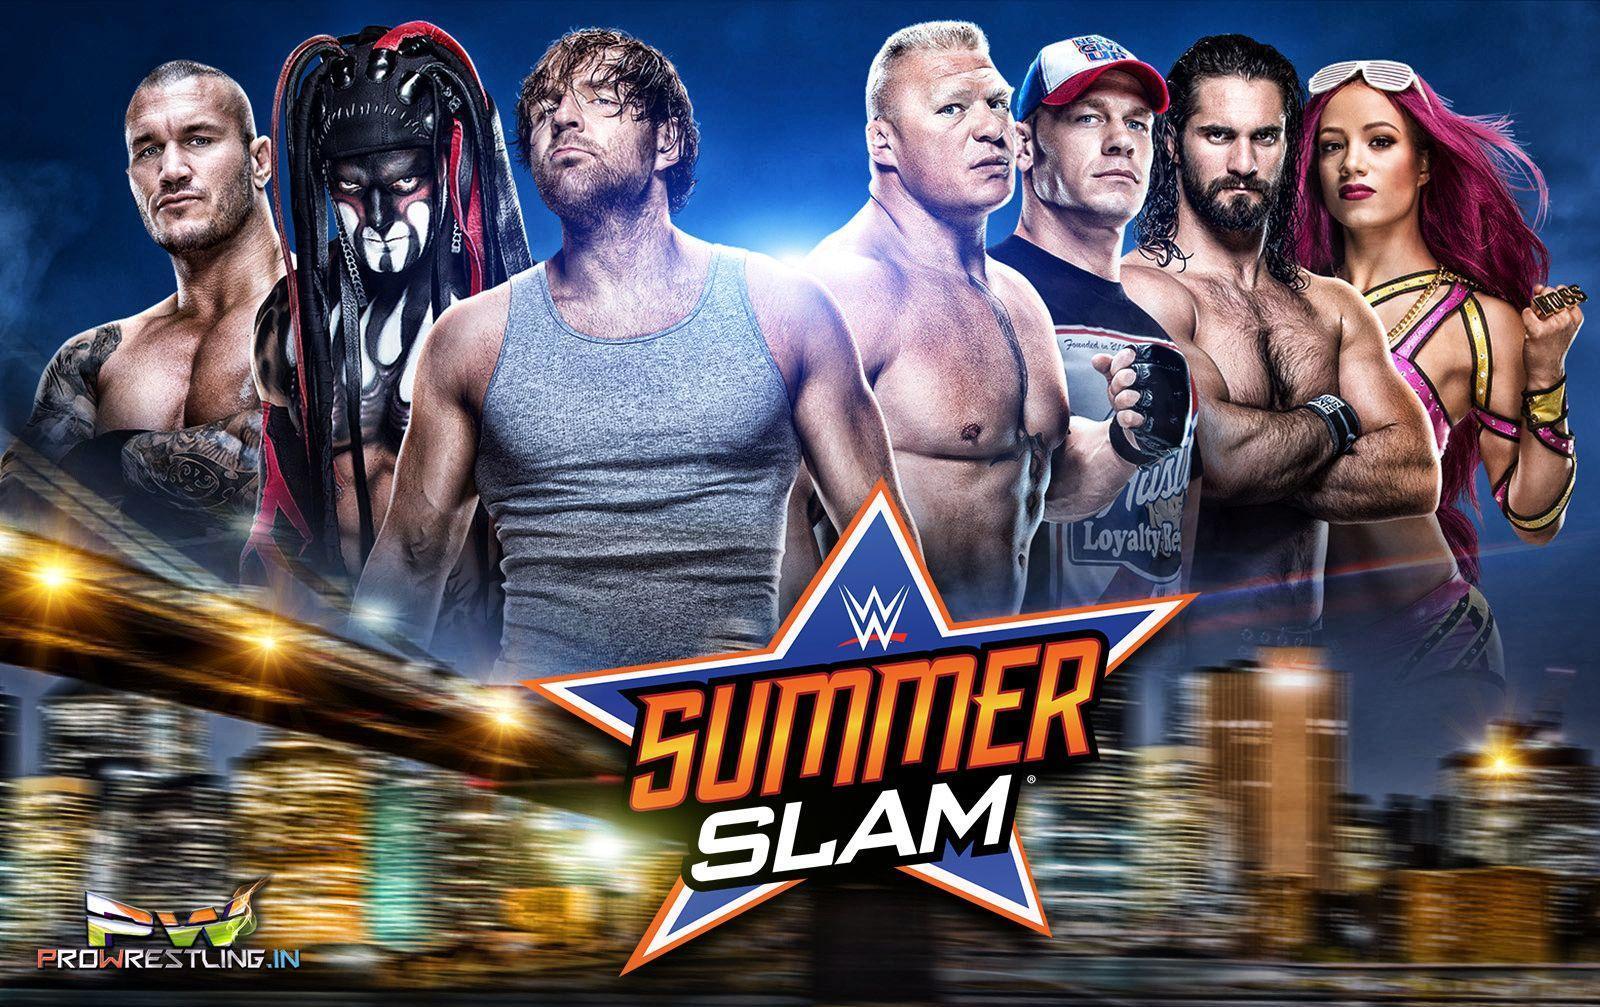 WWE SummerSlam 2016 HQ Official Wallpaper Free Download